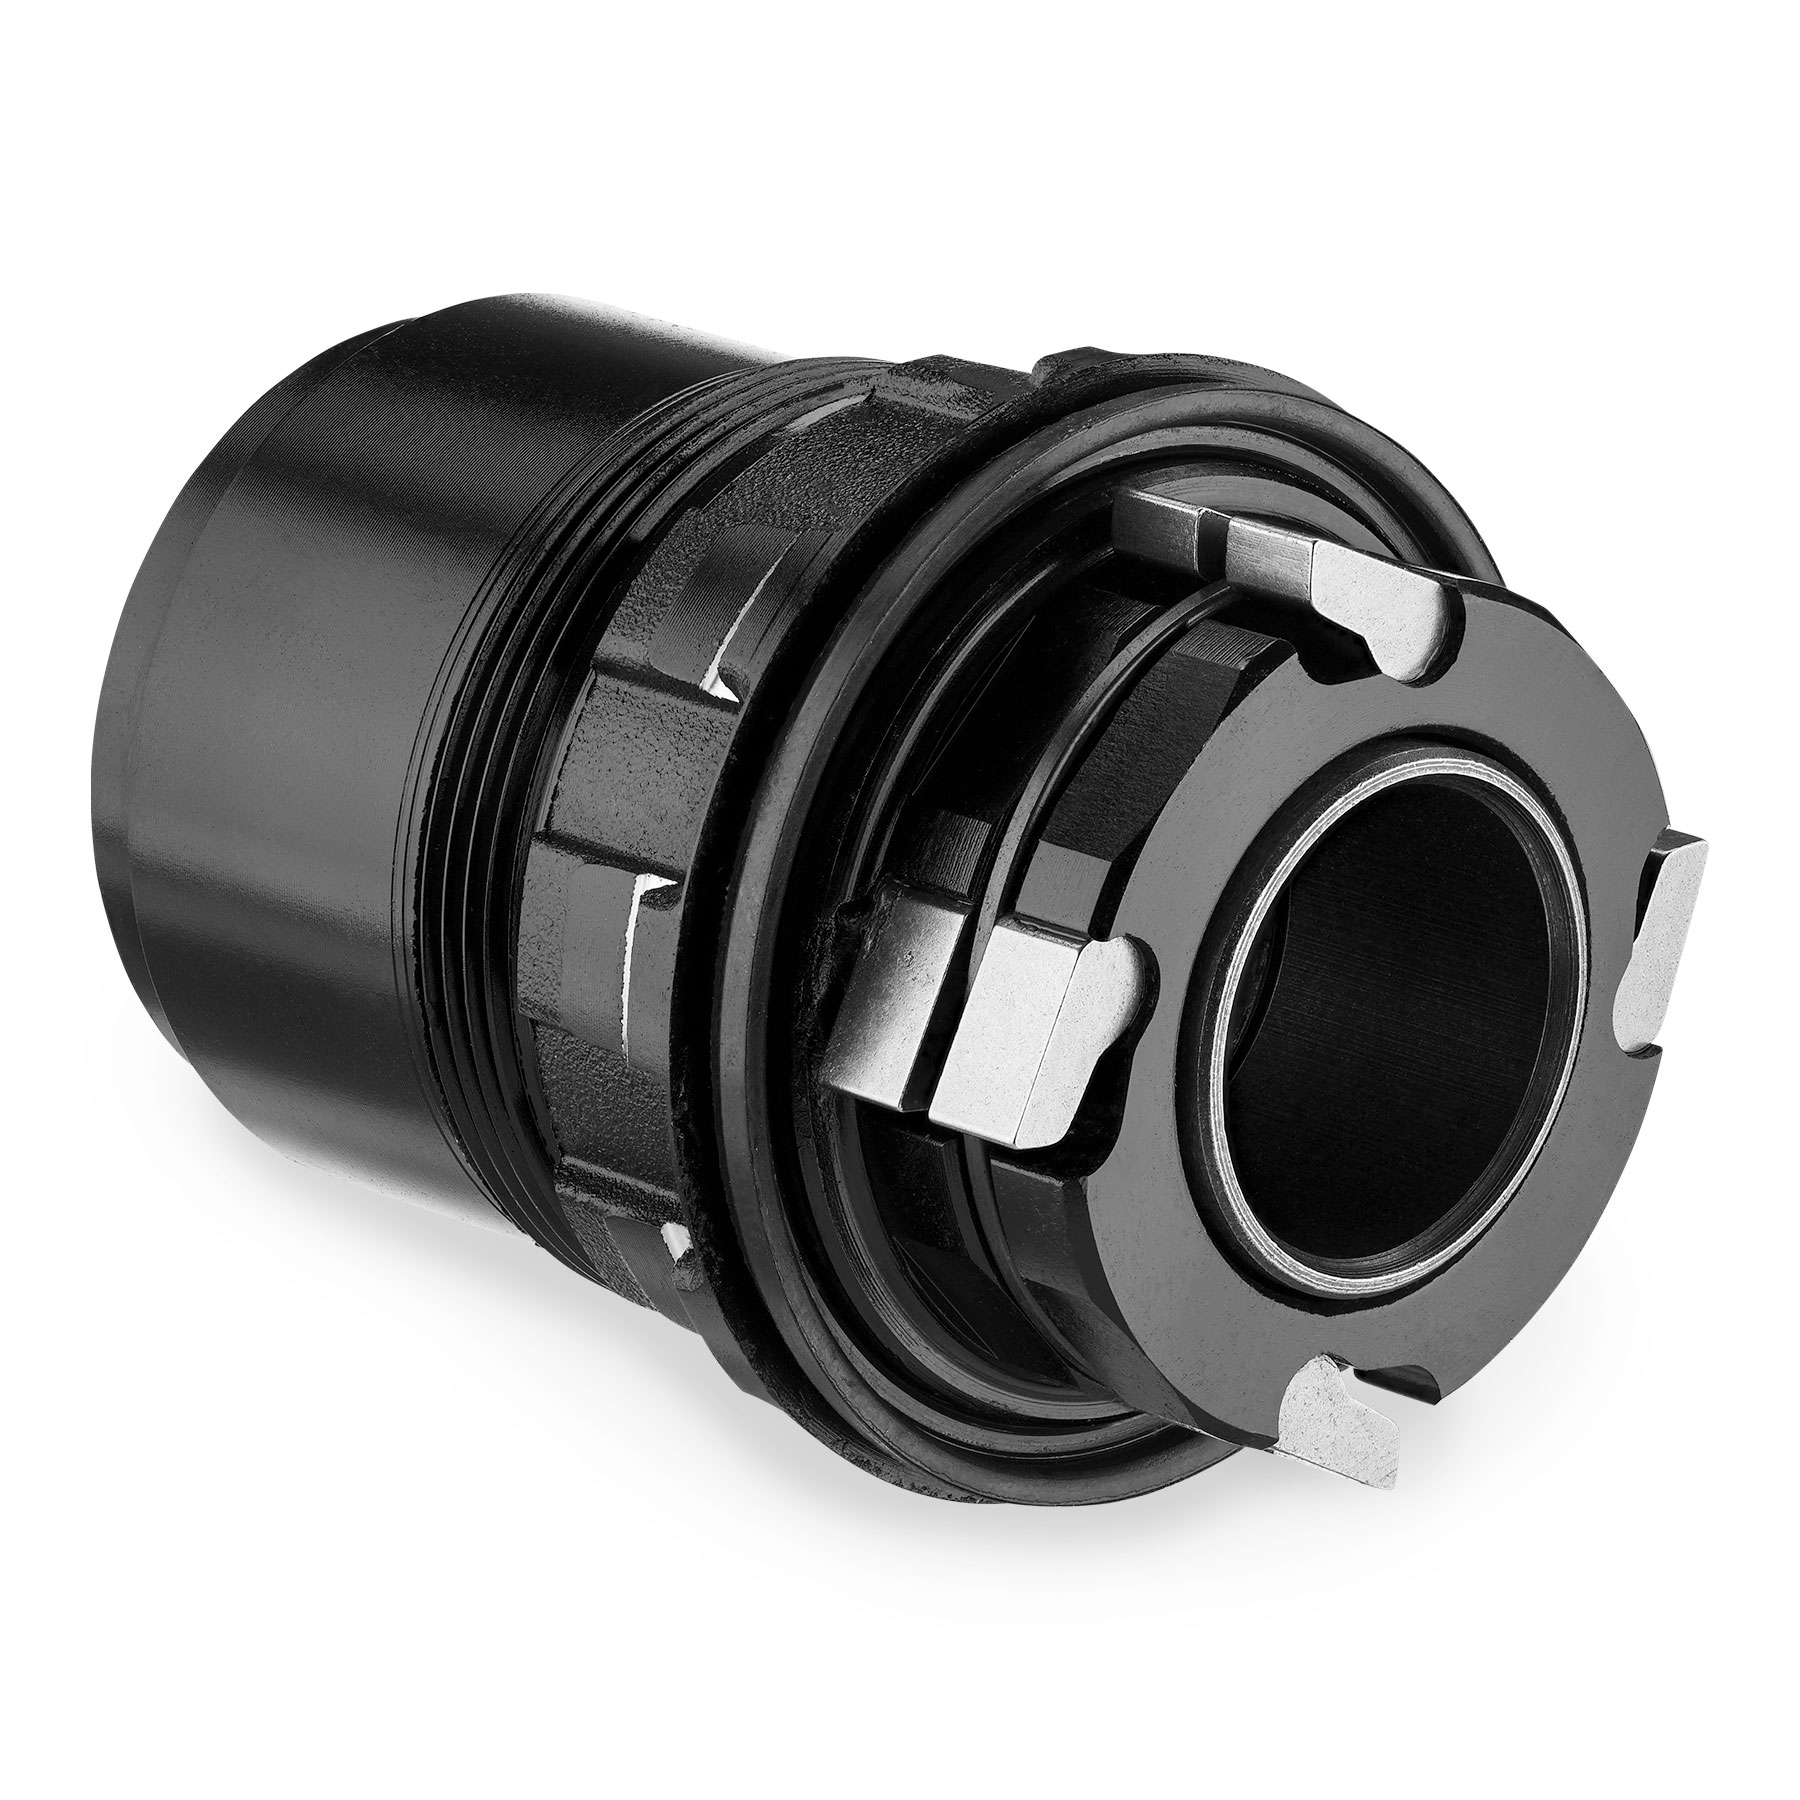 Picture of DXC Freehub Body for DXC RD/FIFTY and THIRTY5 S.E. - SRAM 12 speed